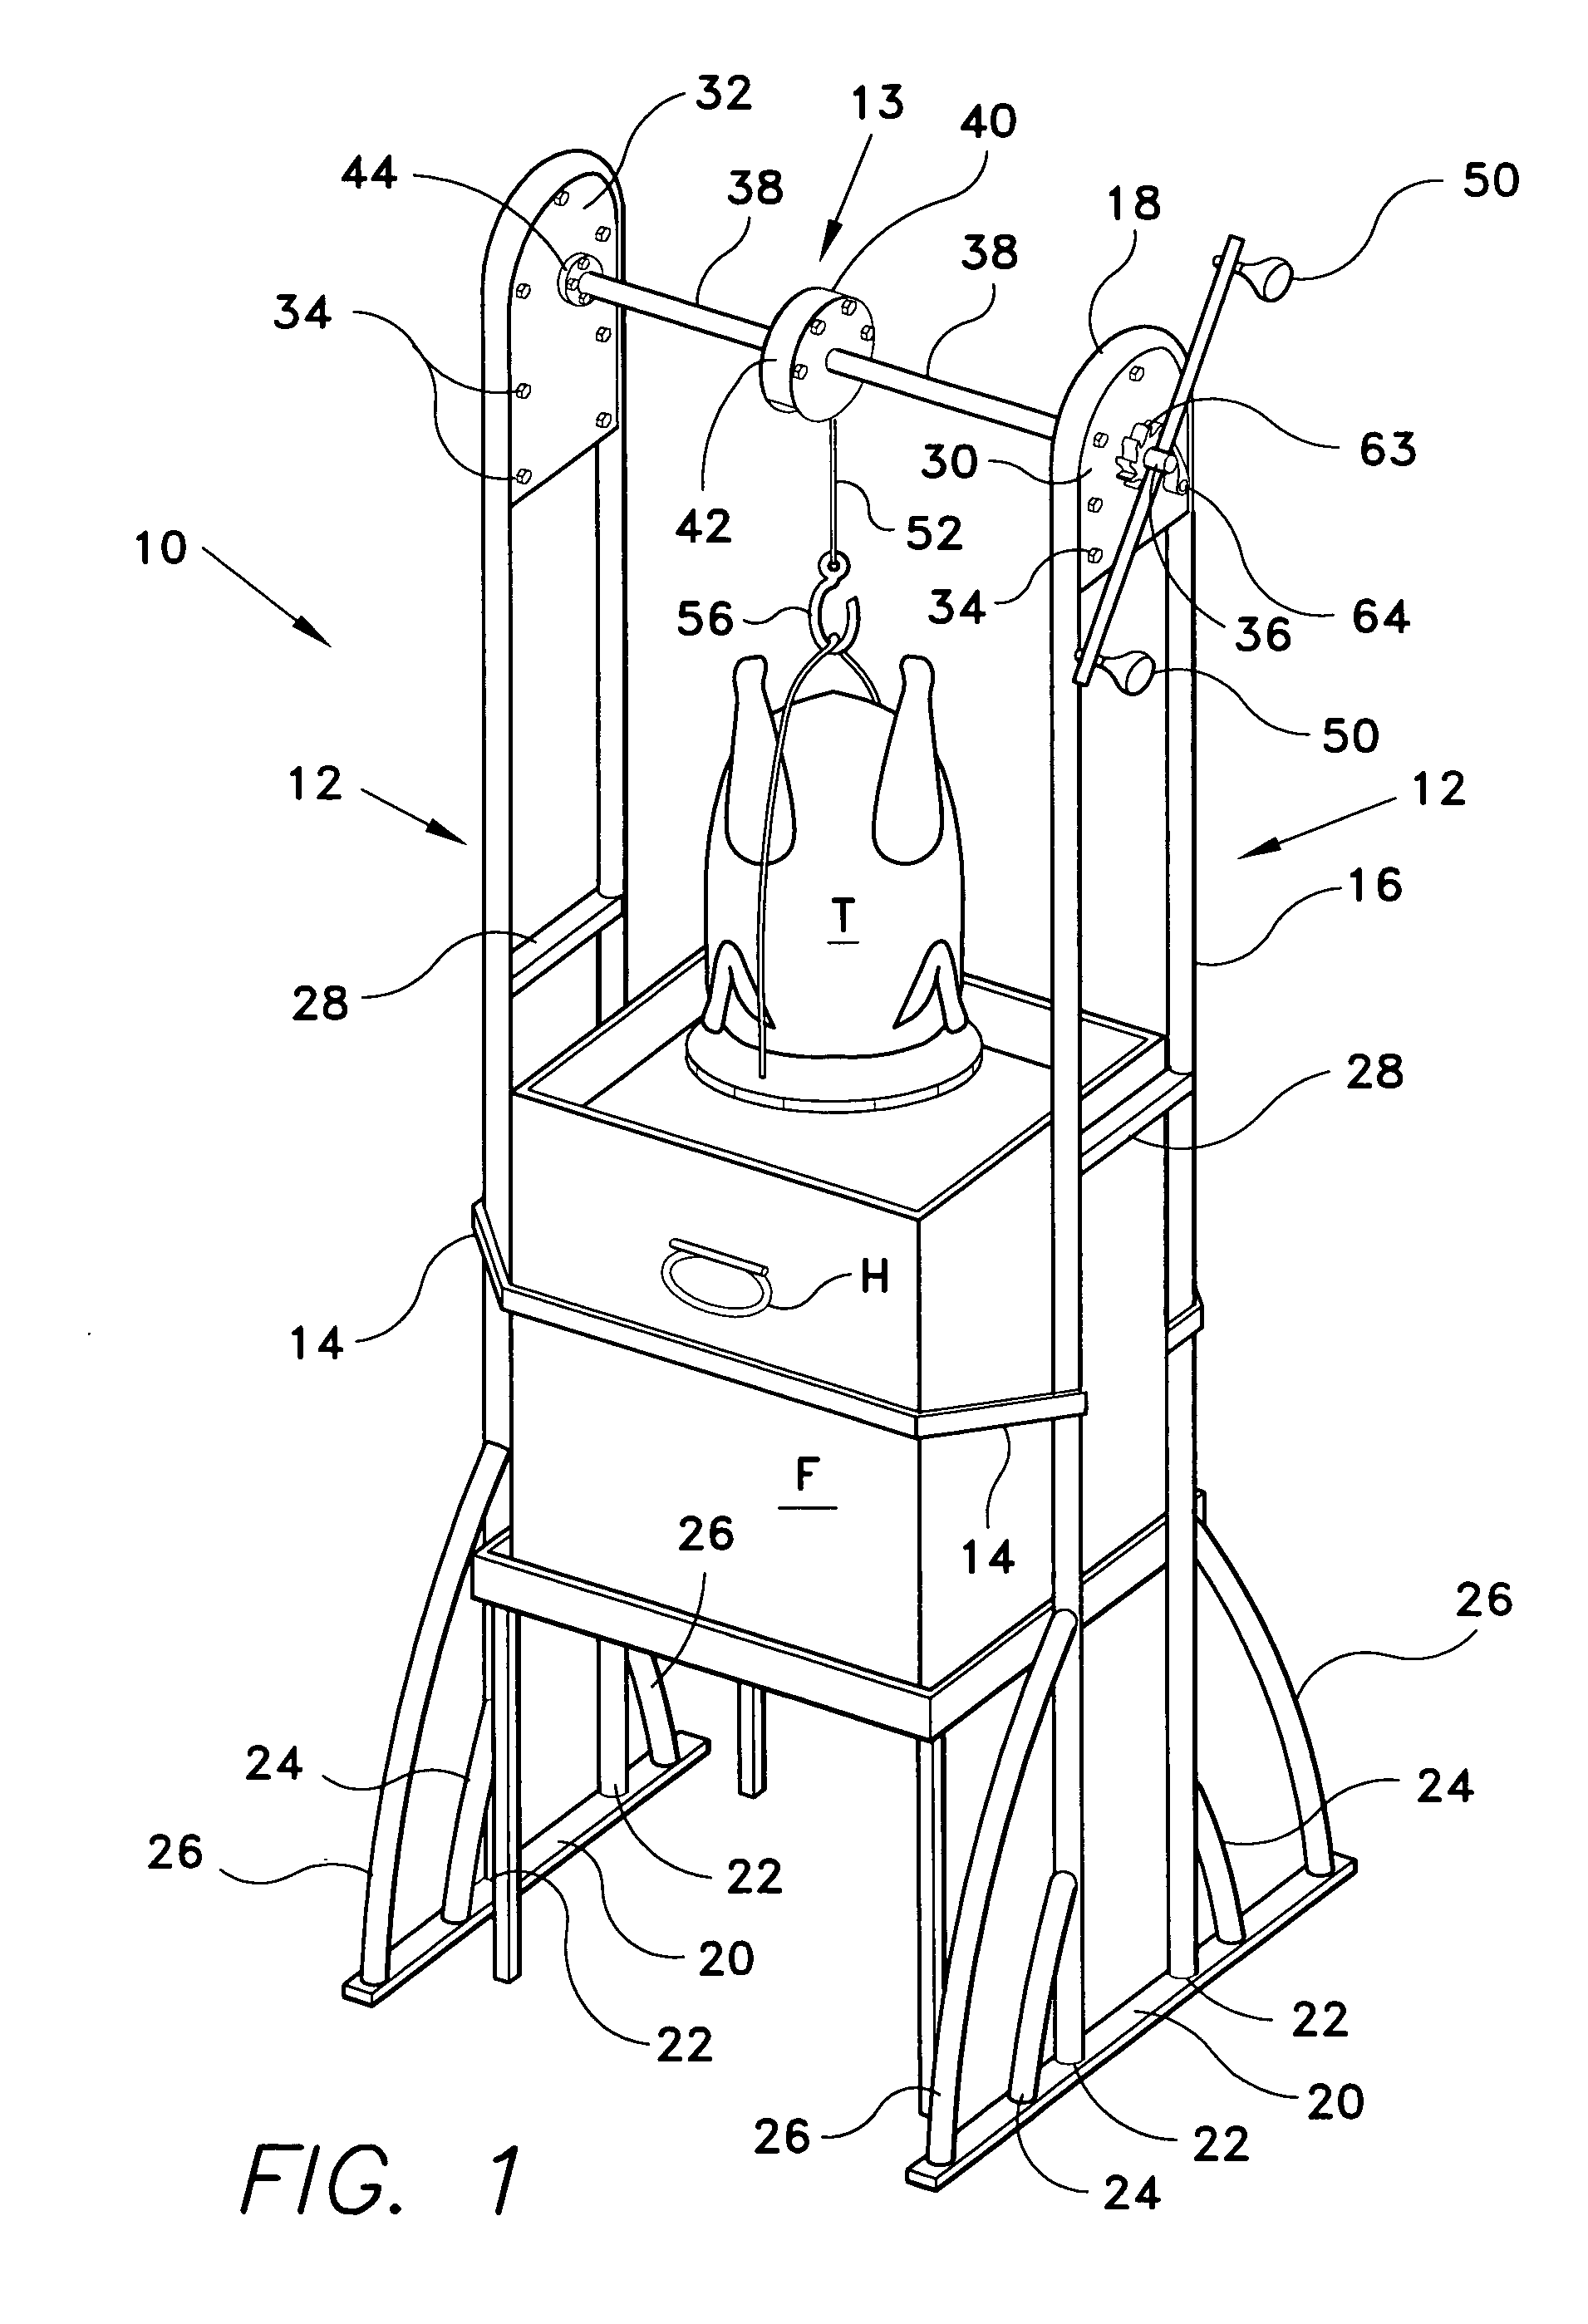 Frying/boiling stand with hoist